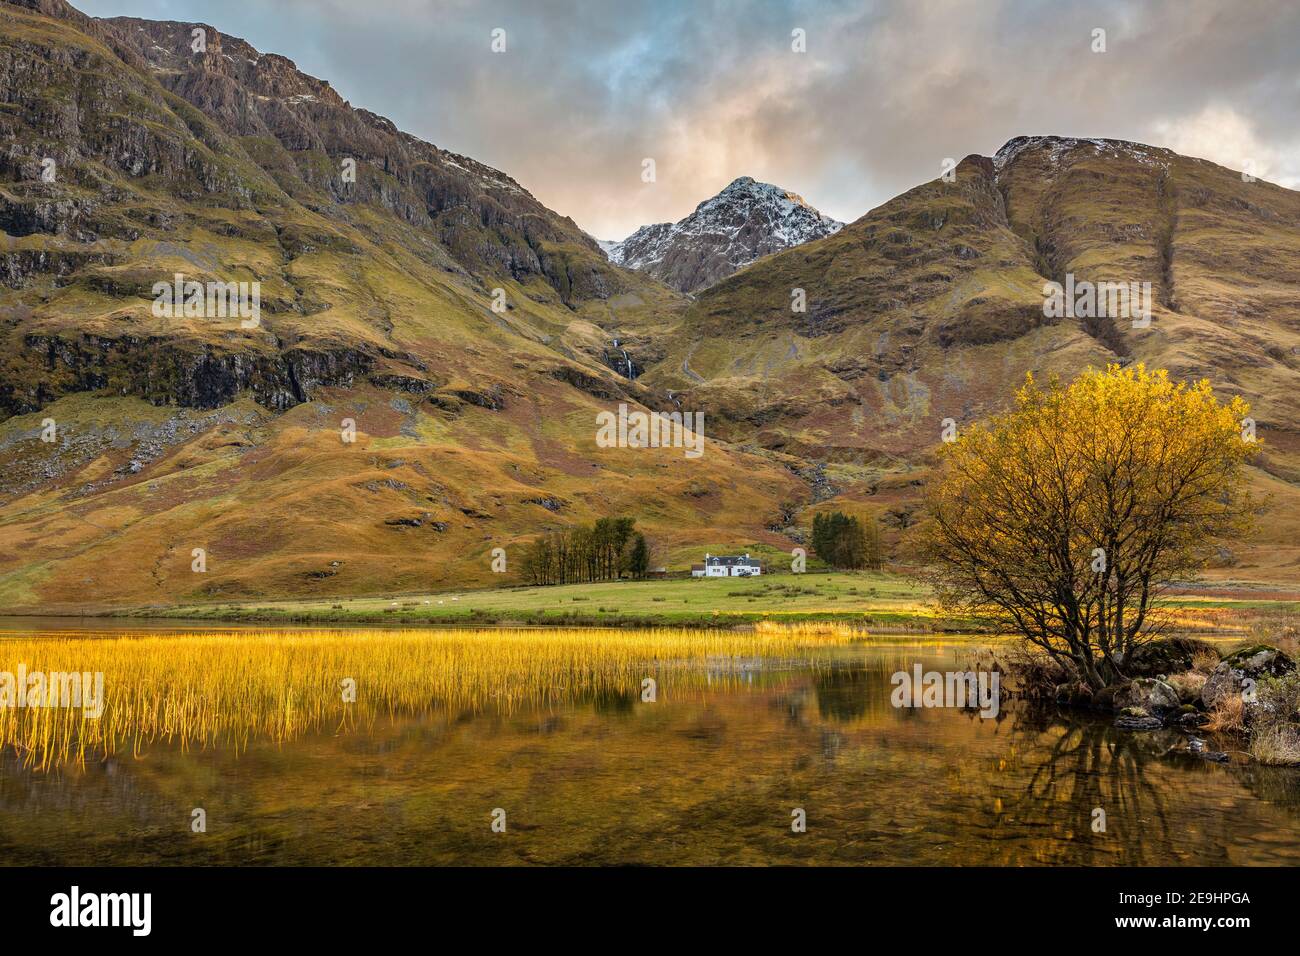 Glen Coe, Scotland: Solitary house in the Scottish Highlands along the river Coe in evening light Stock Photo